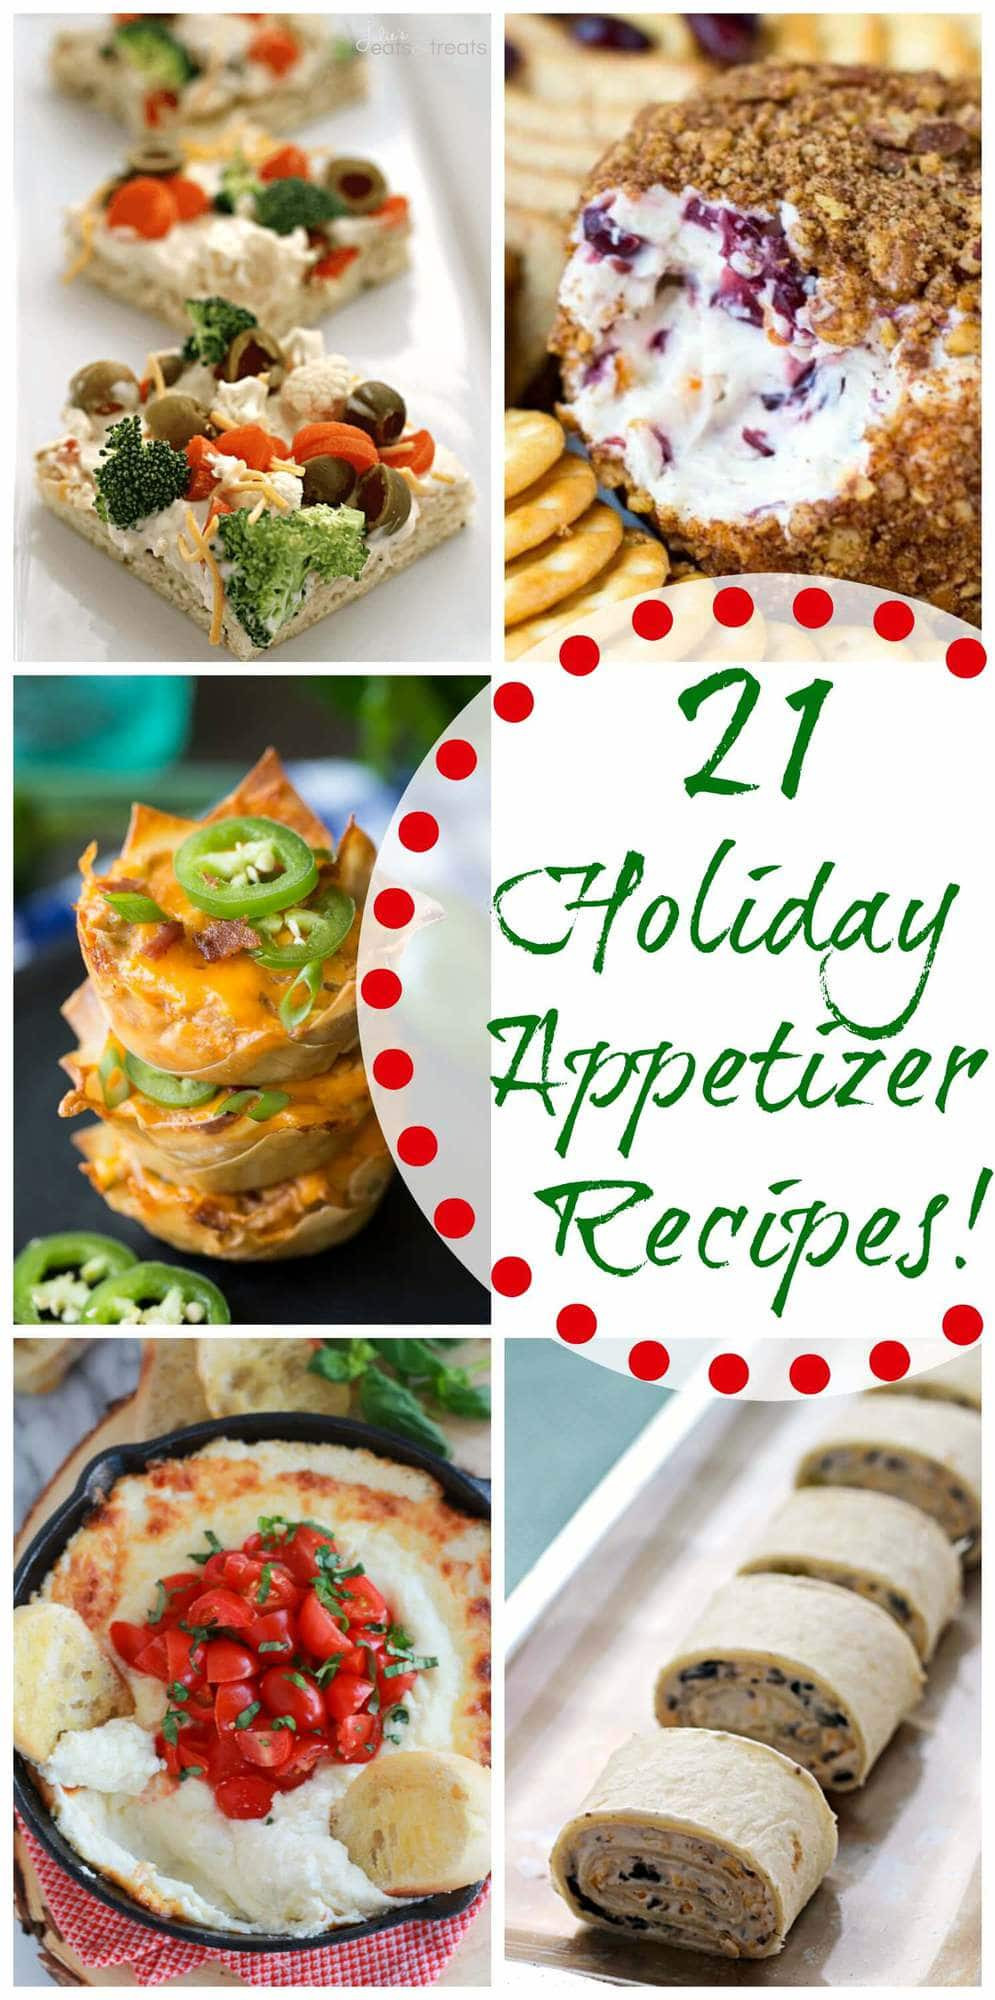 Christmas Party Appetizers Pinterest
 21 Holiday Appetizer Recipes Giveaway Julie s Eats